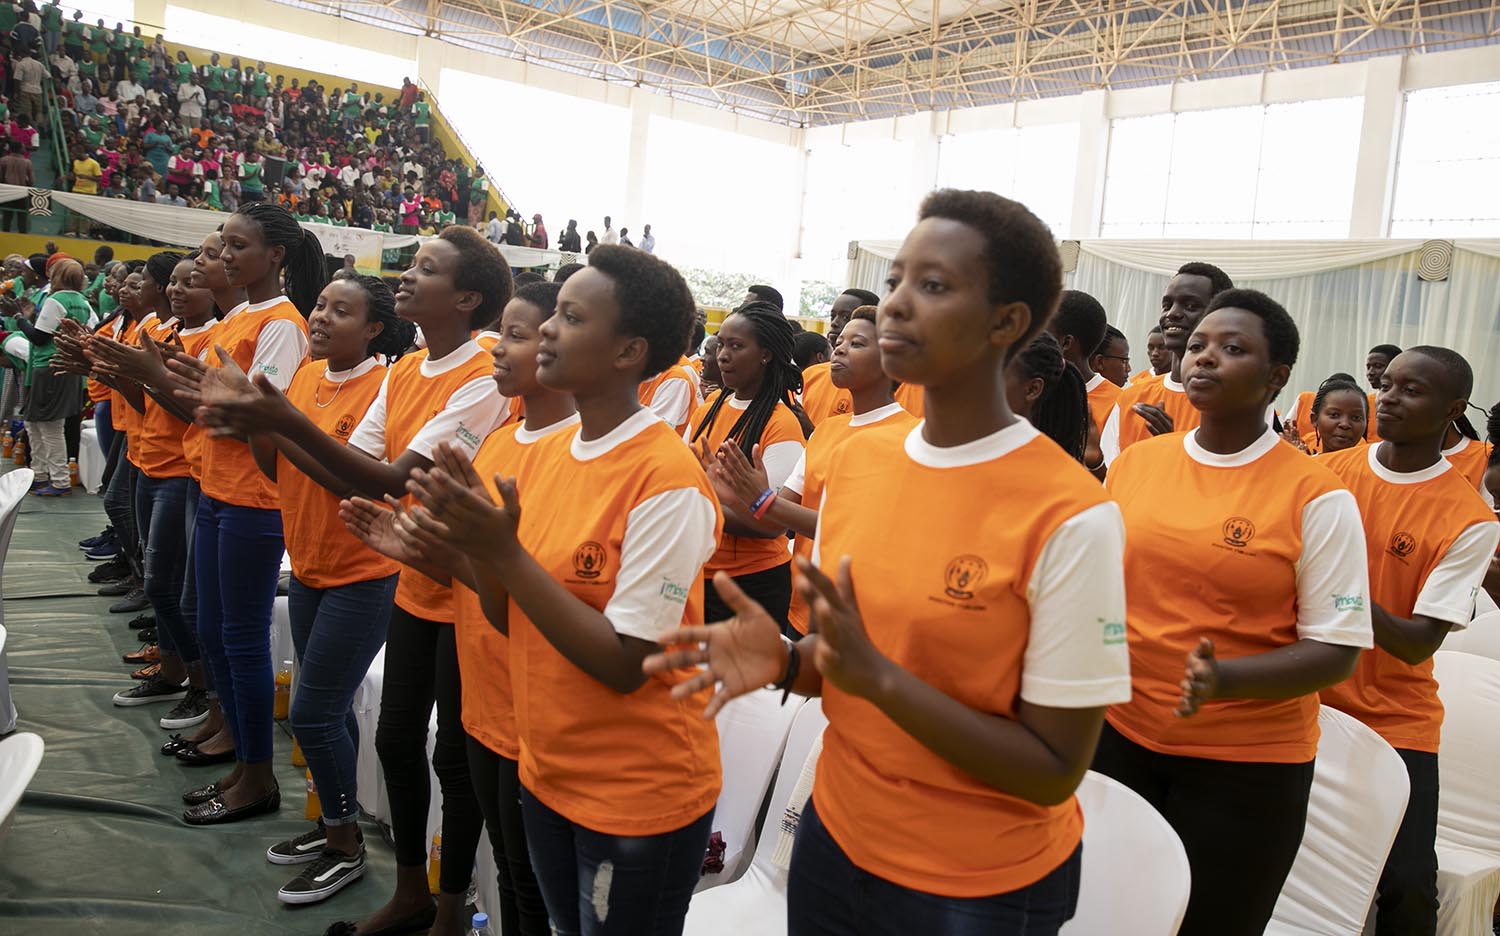 A cross-section of participants during the launch of the Free to Shine â€˜Umwana Wanjye, Ishema Ryanjyeâ€™ campaign at Amahoro Indoor Stadium in Remera, Kigali yesterday. Courtesy.